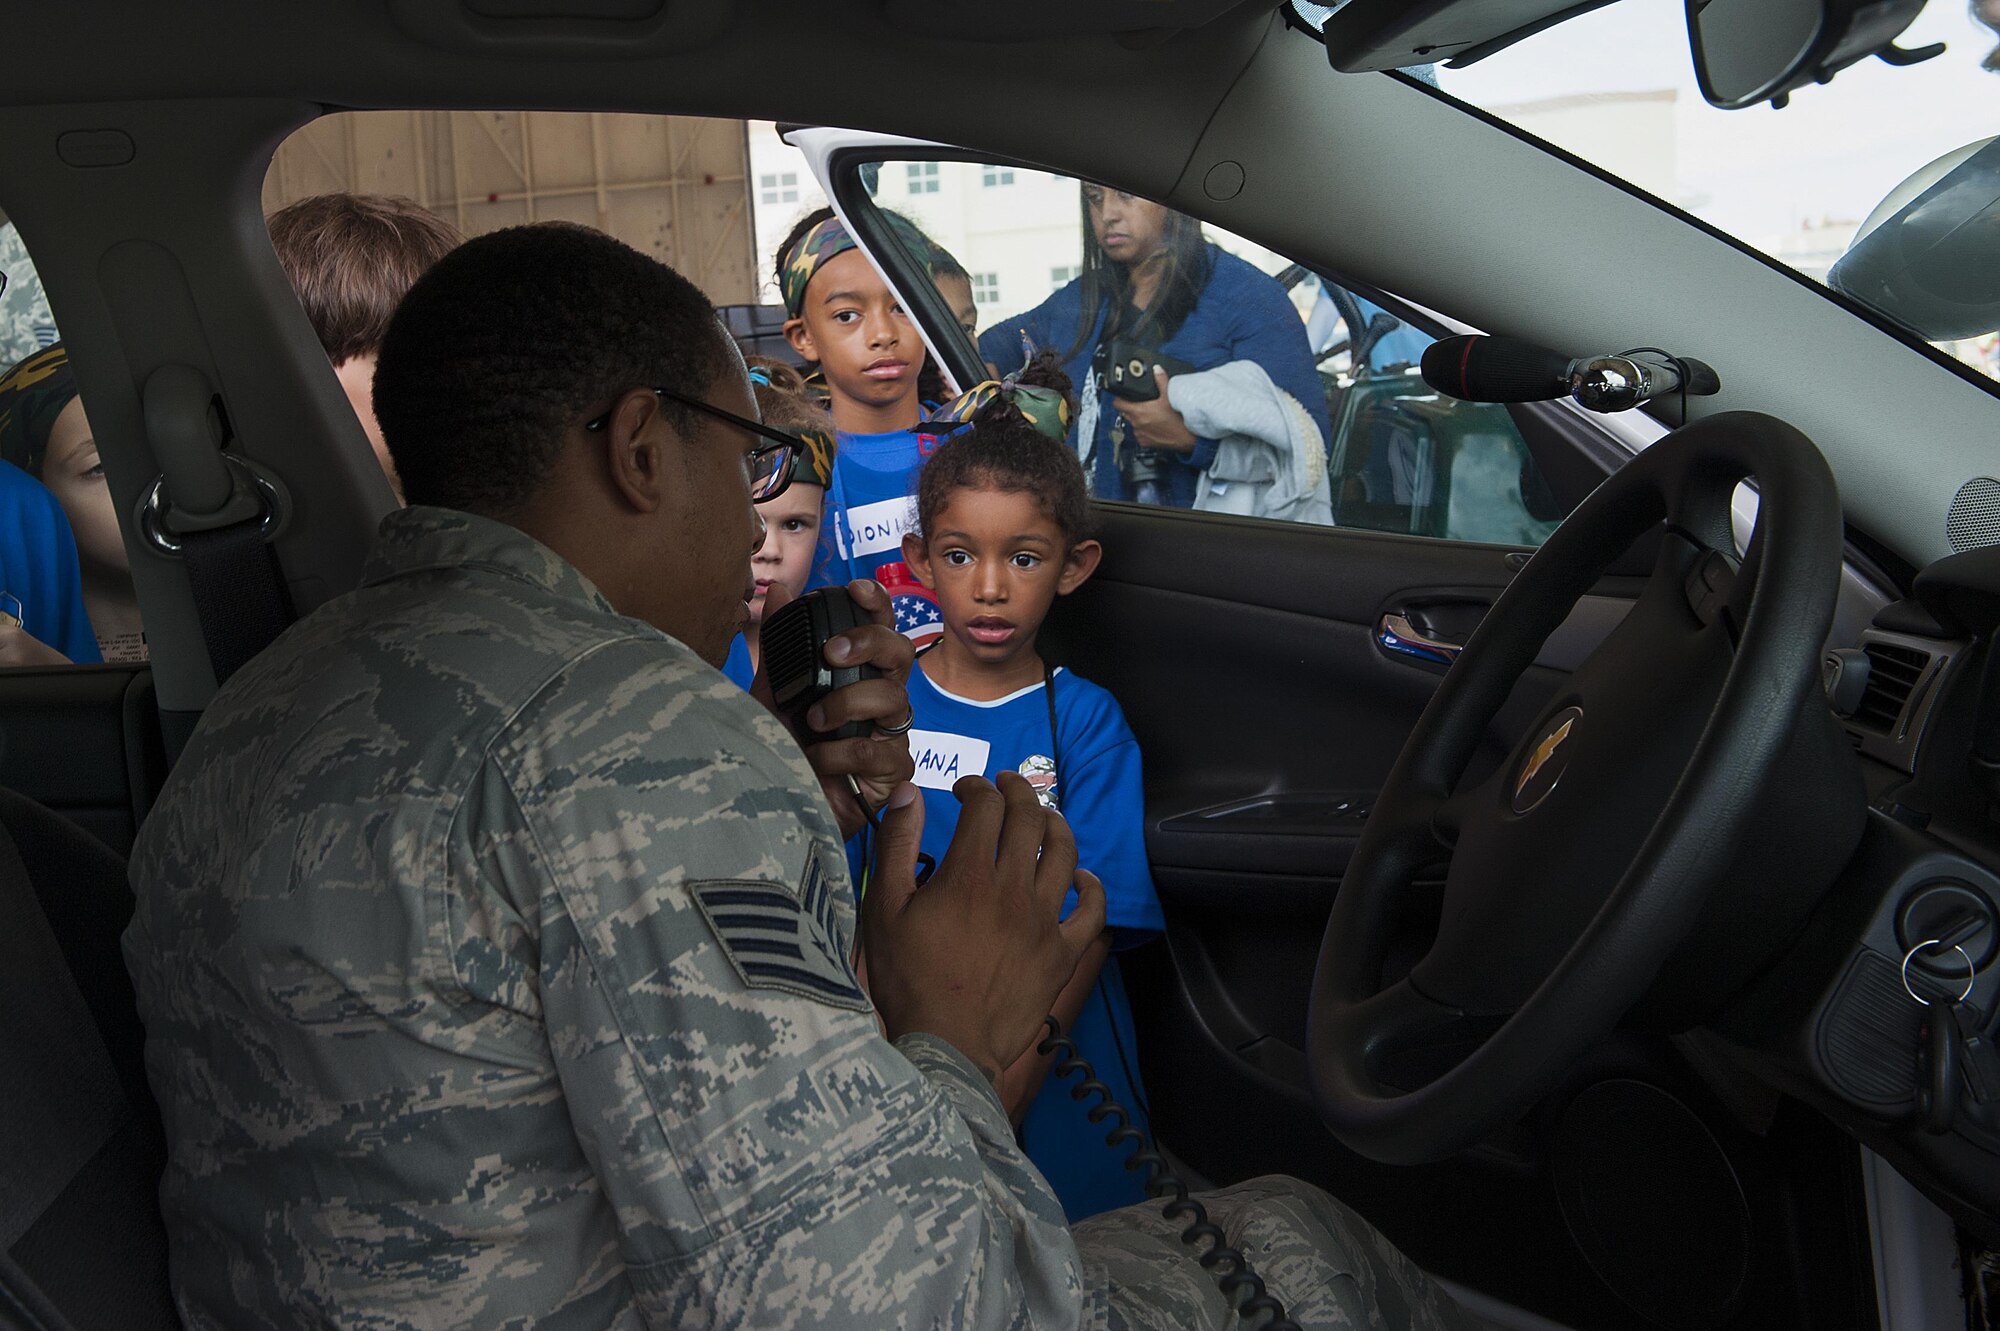 U.S. Air Force Staff Sgt. Darren Harris, 18th Security Forces Squadron, shows children how the radio on the patrol car works at Skoshi Warrior Nov. 14, 2015, at Kadena Air Base, Japan. More than 200 children participated in this annual event, meant to show children their parents’ deployment process and to see different aspects of military jobs. (U.S. Air Force photo by Airman 1st Class Corey M. Pettis/Released)   